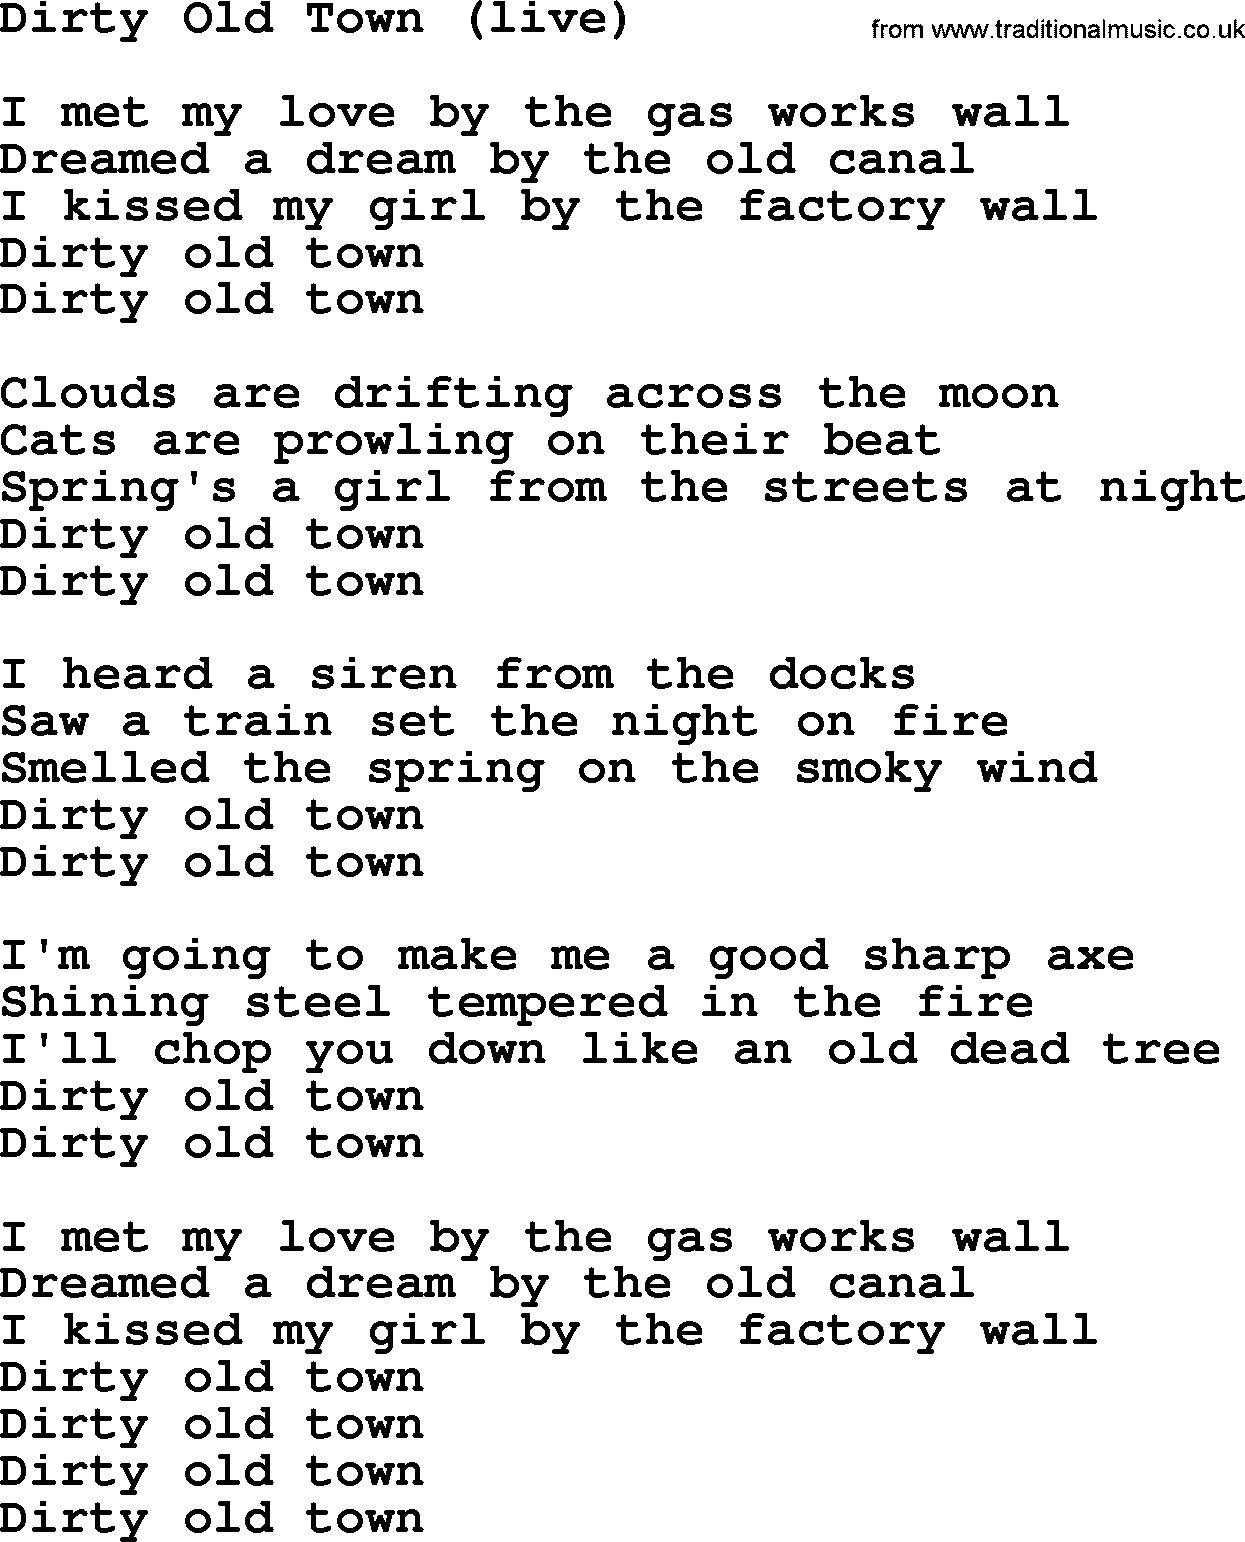 The Dubliners song: Dirty Old Town (live), lyrics